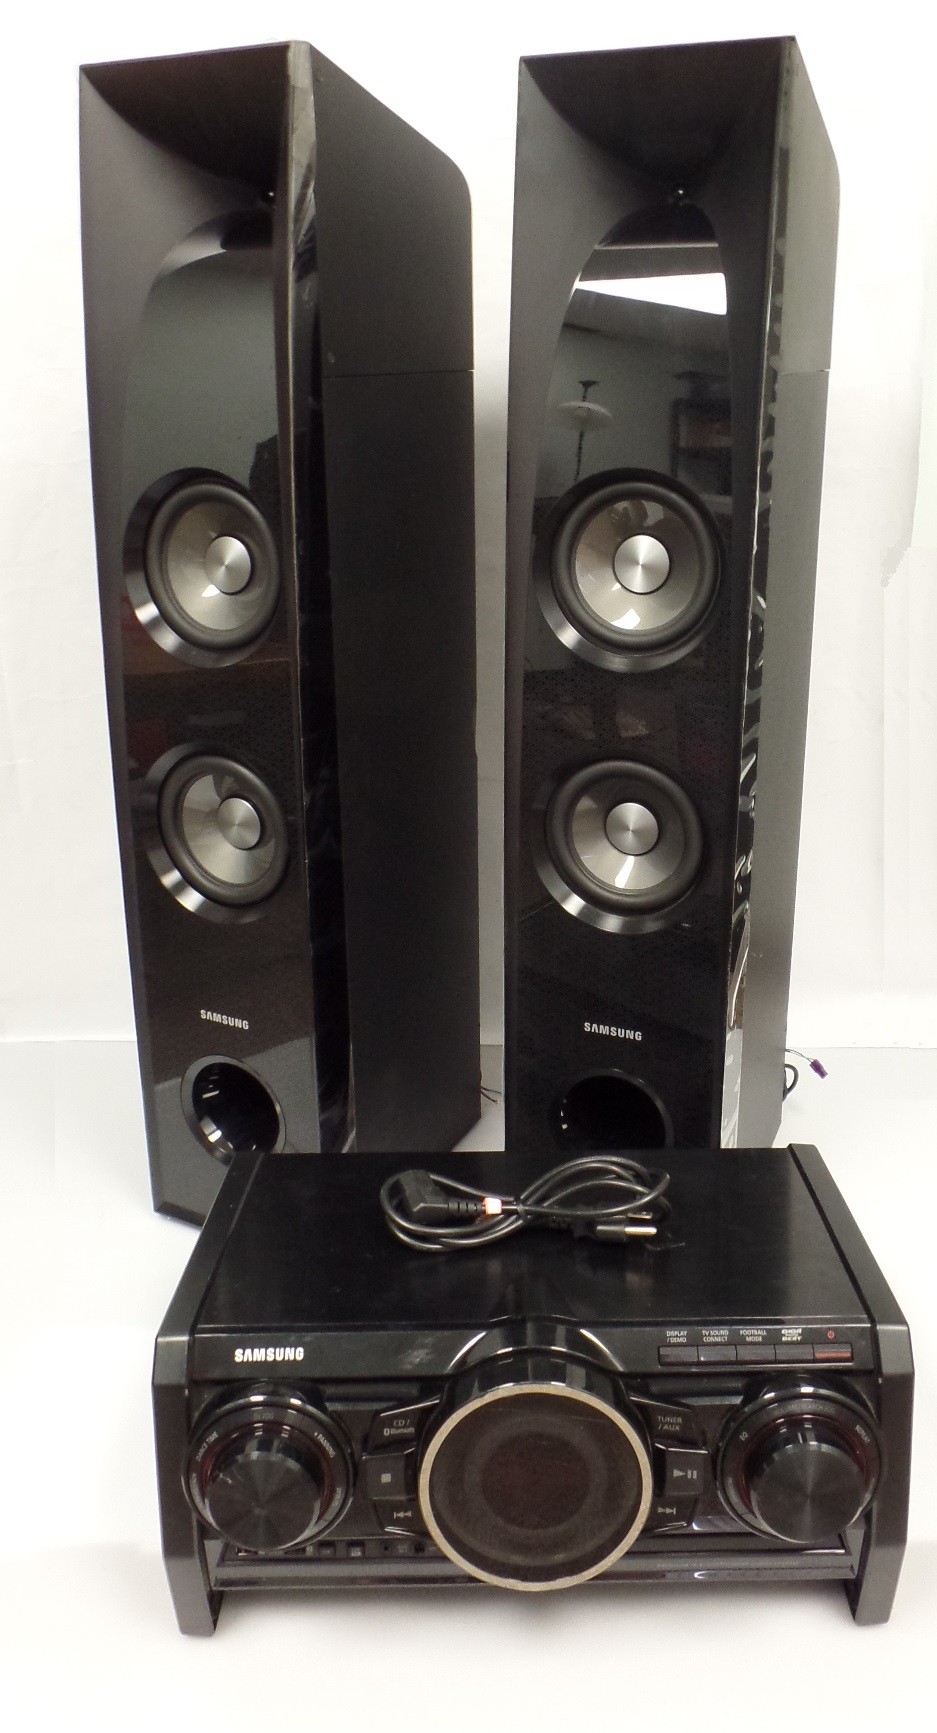 Samsung MX-HS7000 MX-HS7000/ZA Audio System + Pair of Tower Speakers TW-J5500